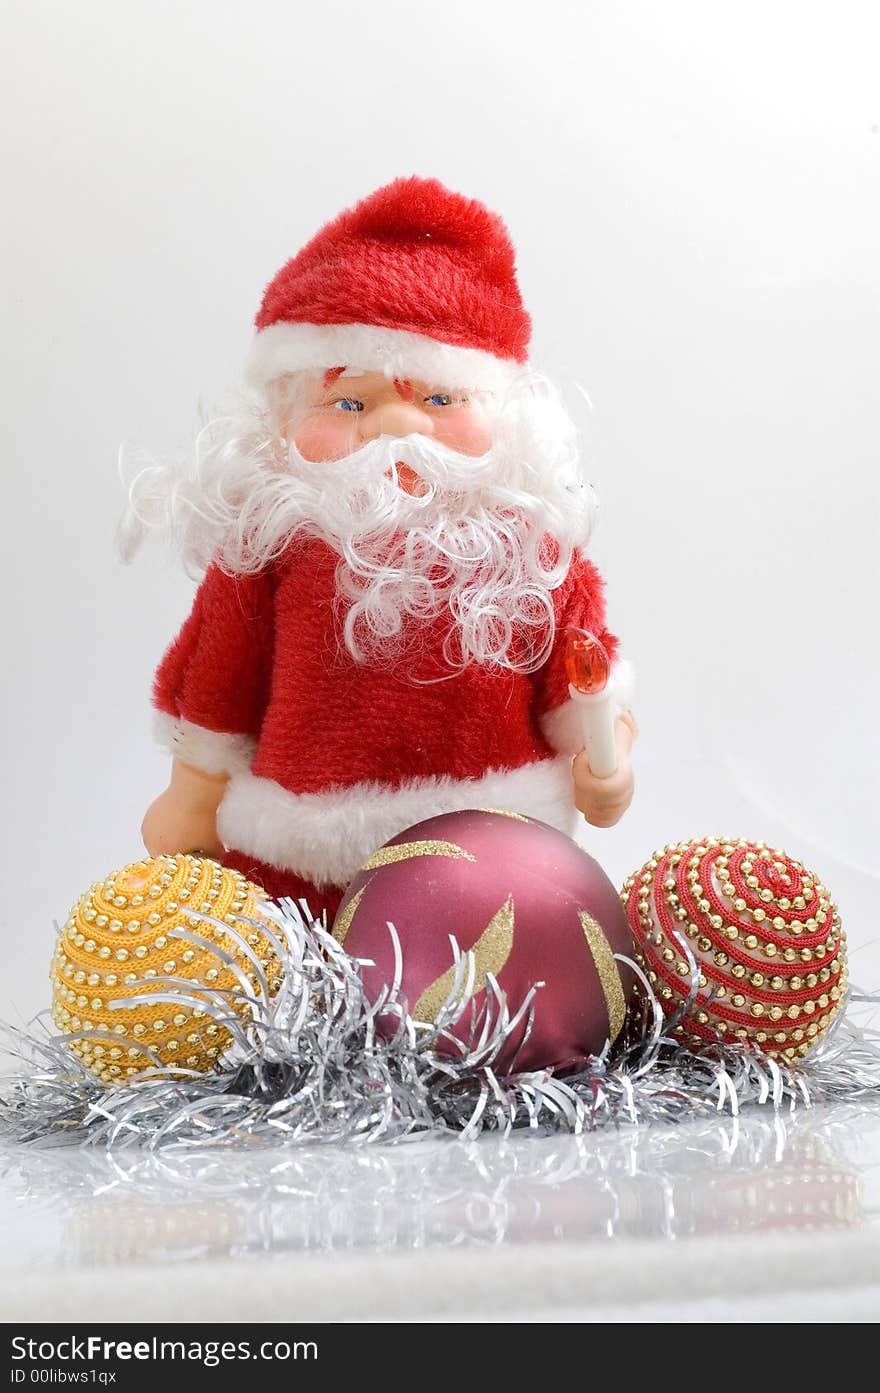 Santa claus toy on white background with Christmas tree decorations.